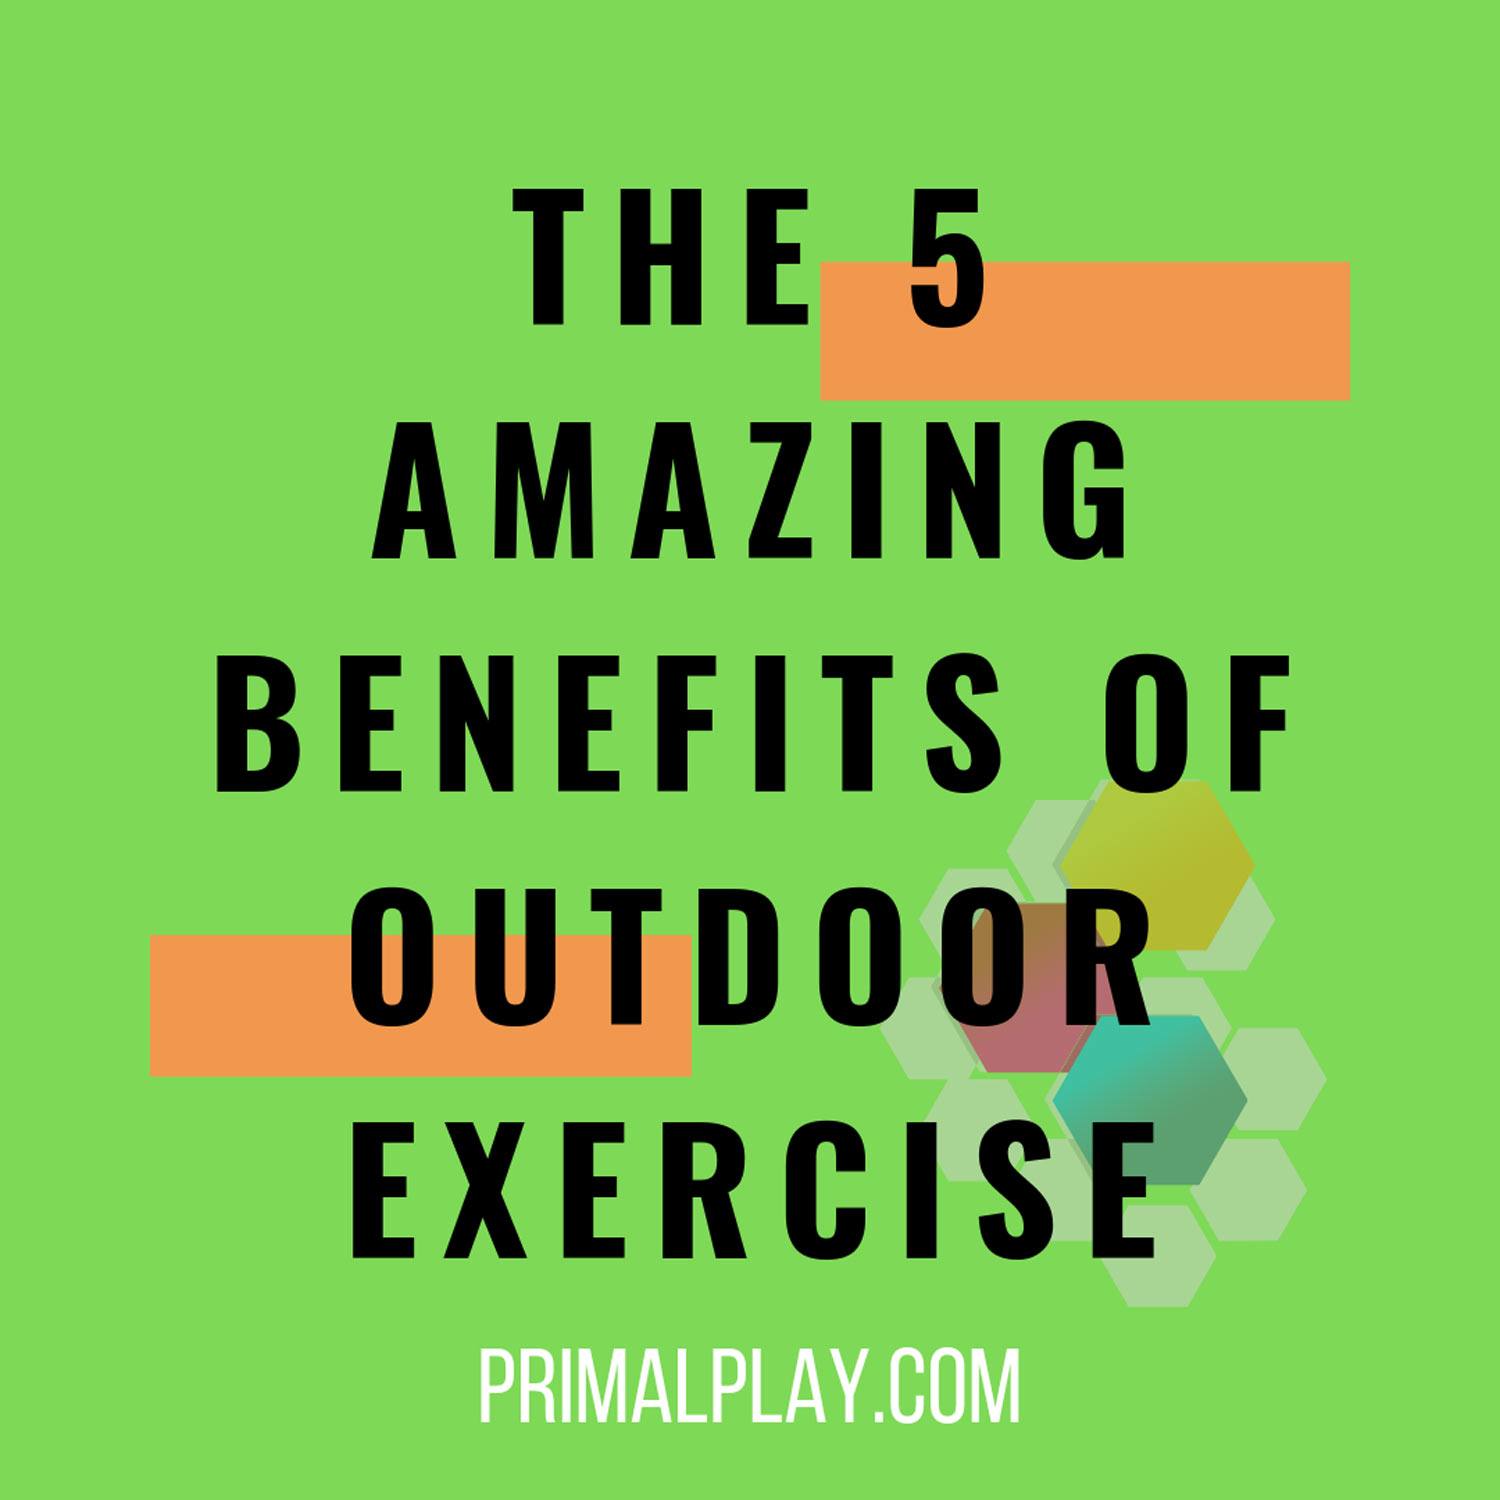 III. The Impact of Outdoor Exercise on Mental Health